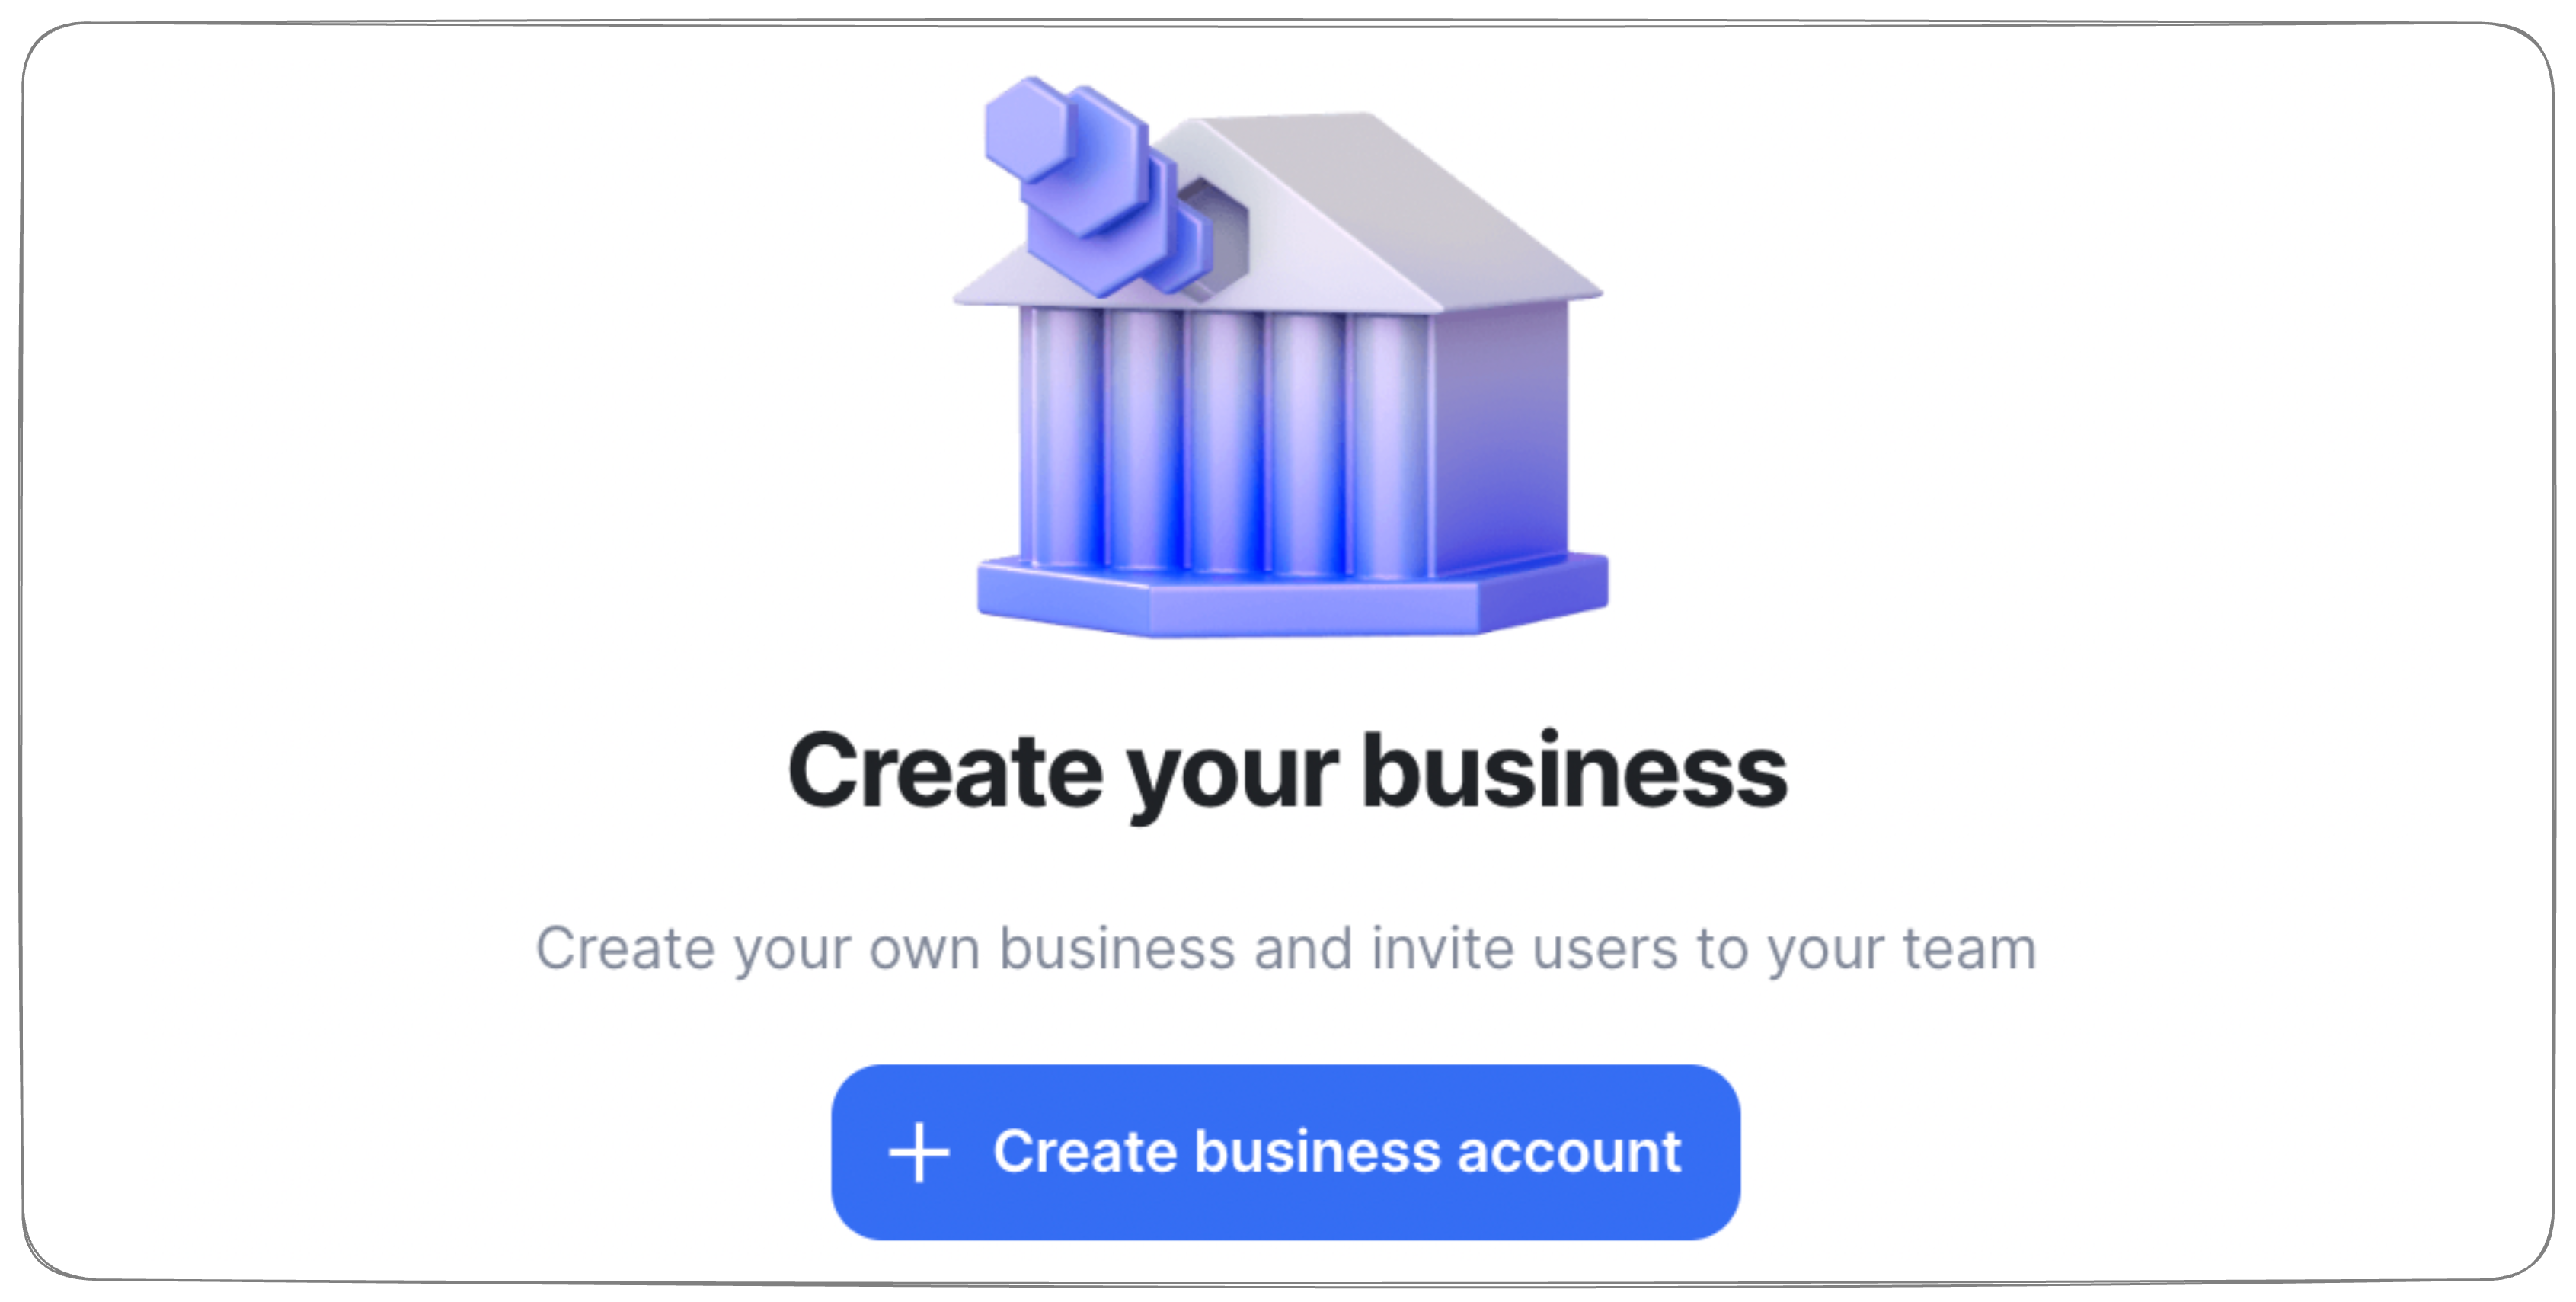 Create business account